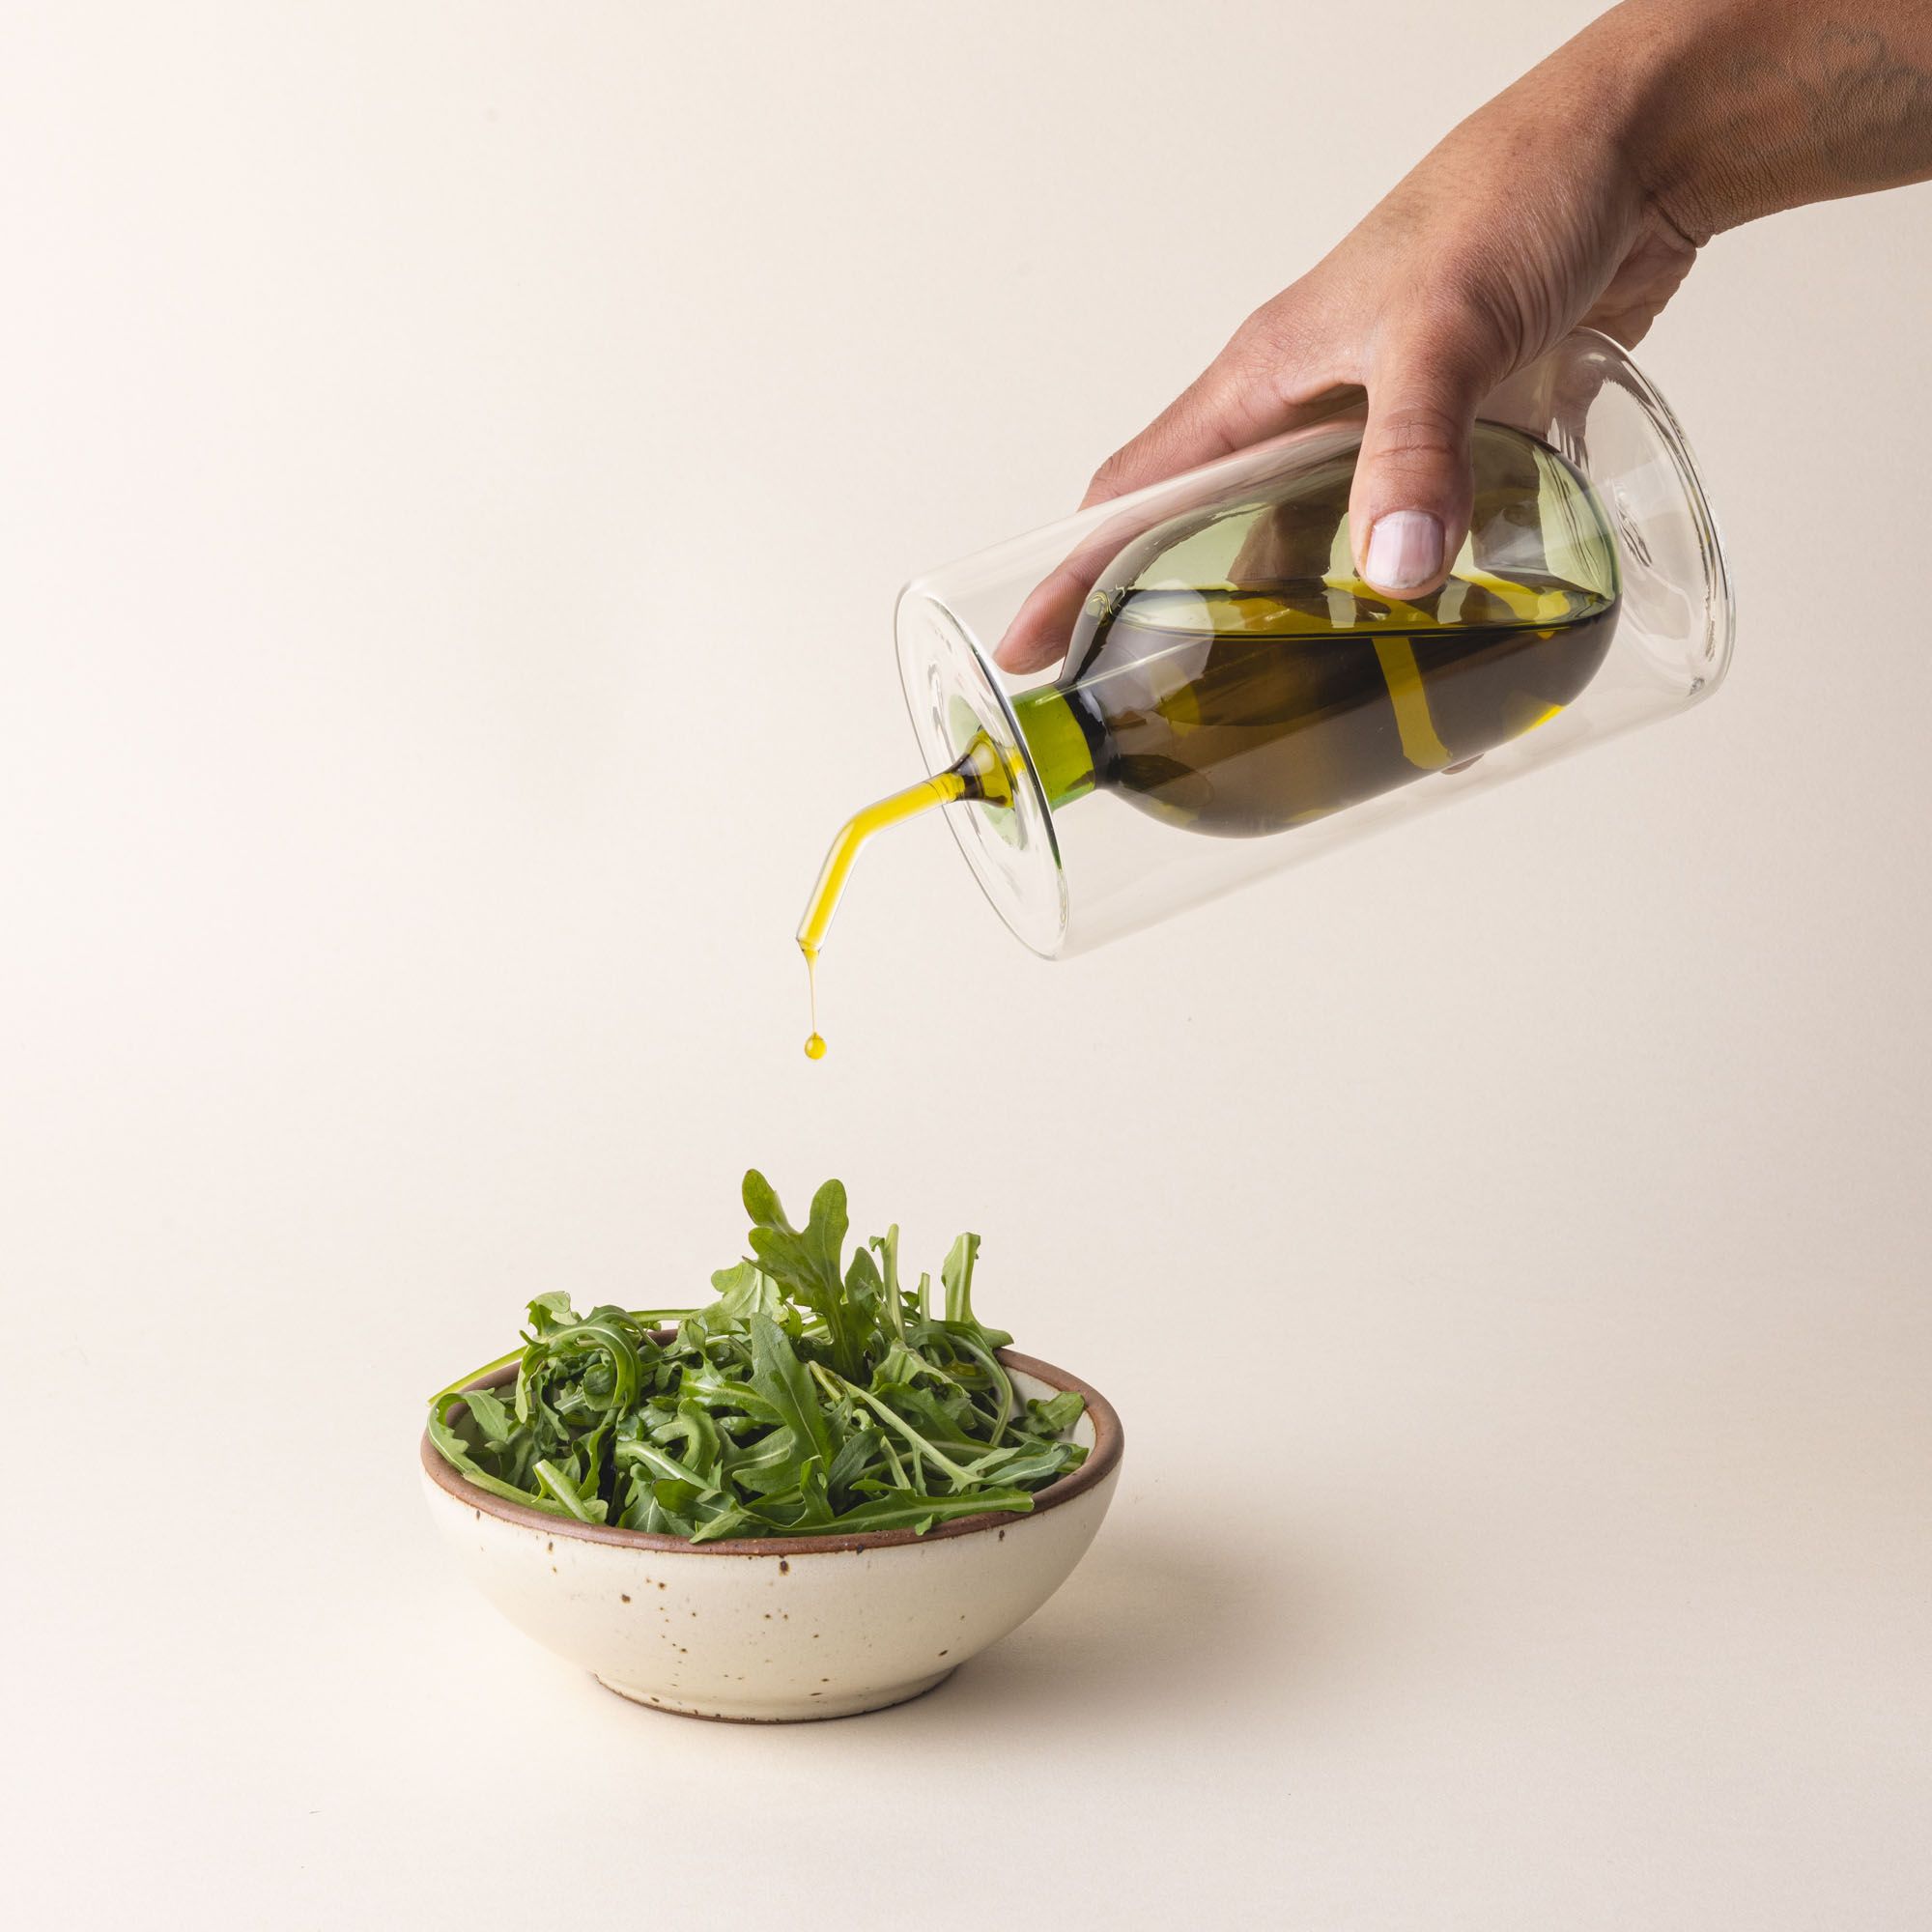 A hand holds an artful glass cruet in a green color and is pouring it over a small side salad. There is a rounded bulb that acts as a container for the cruet, surrounded by a doubled glass wall. The cruet is filled with oil.